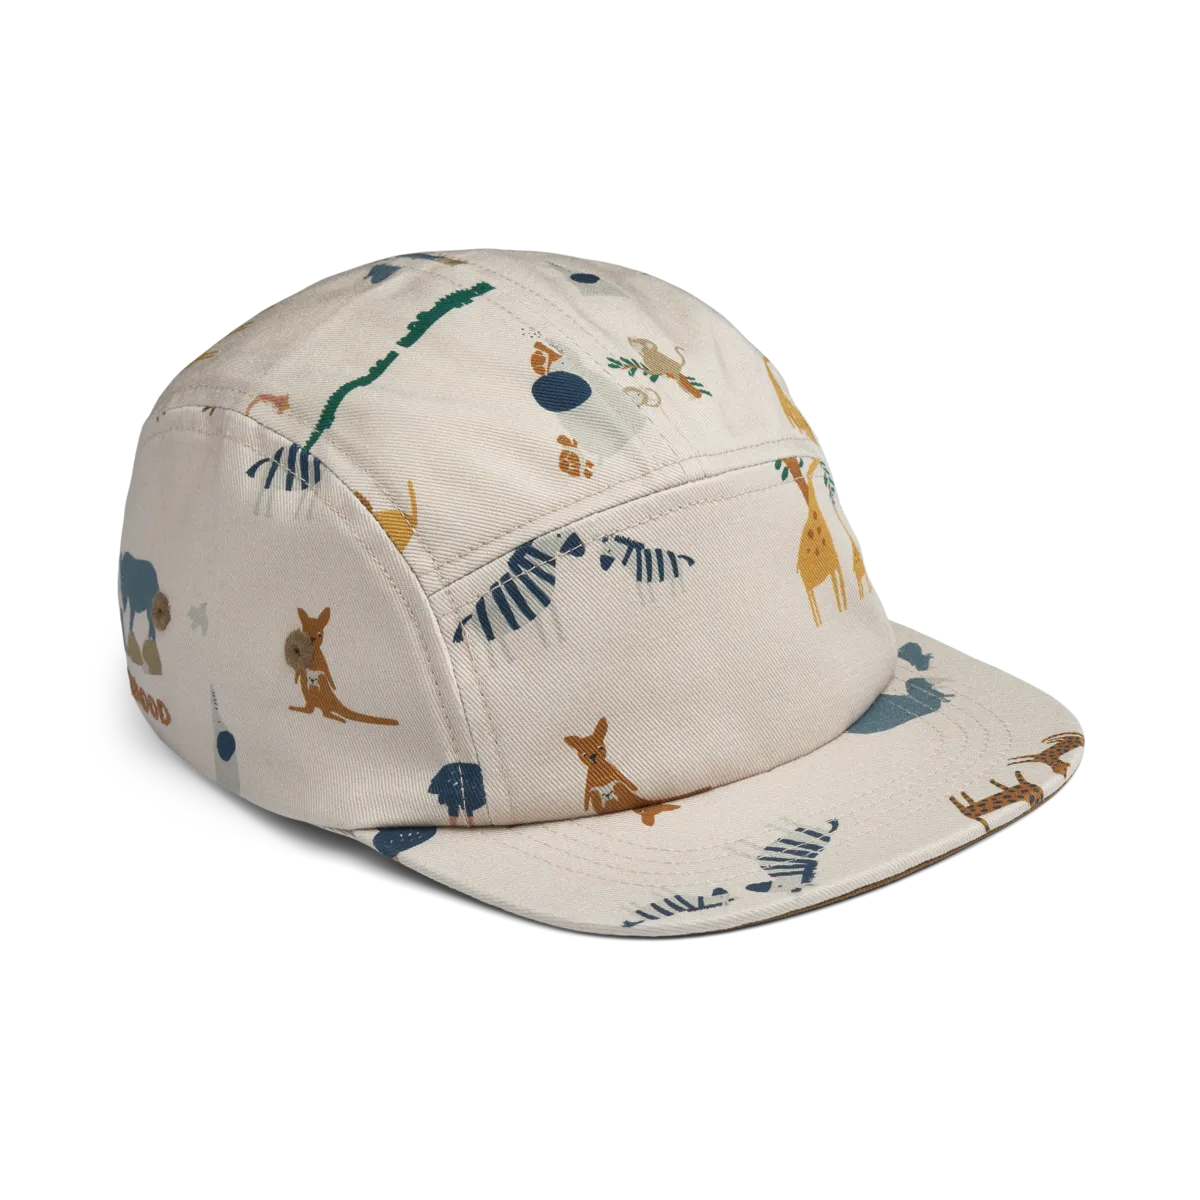 Casquette Rory all together - LIEWOOD lw17559 1499 1-4ans 5715335324381